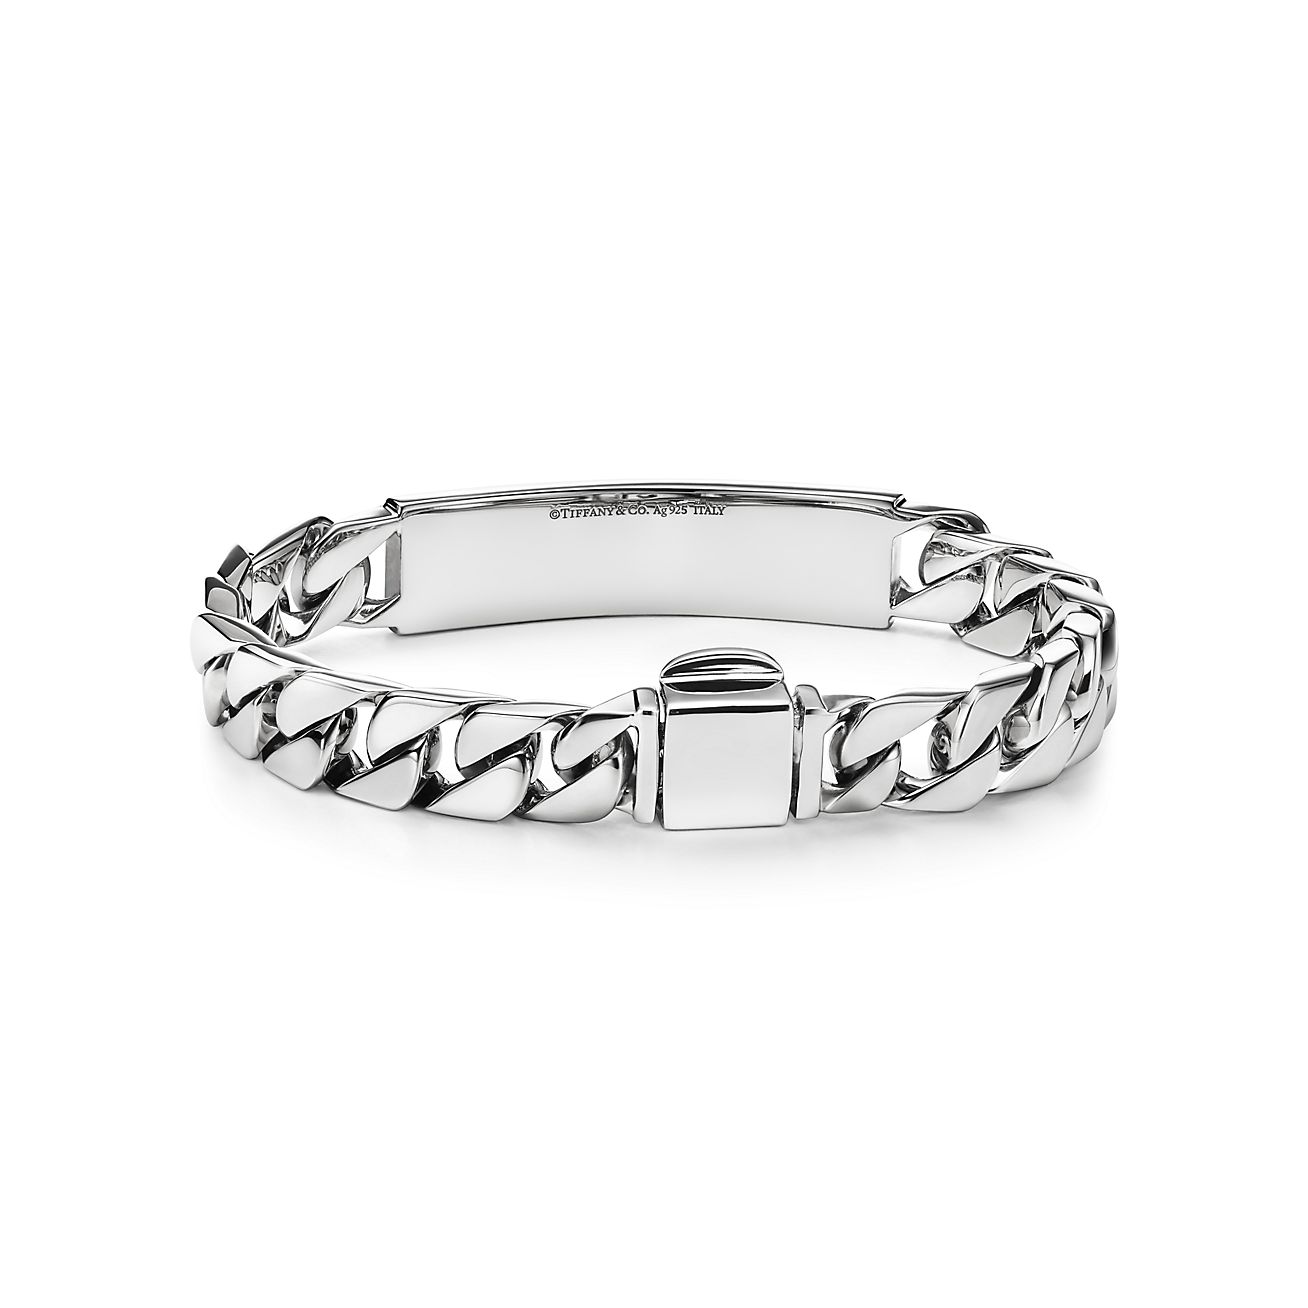 Amigo ID Bracelet for men in Sterling Silver with Diamond